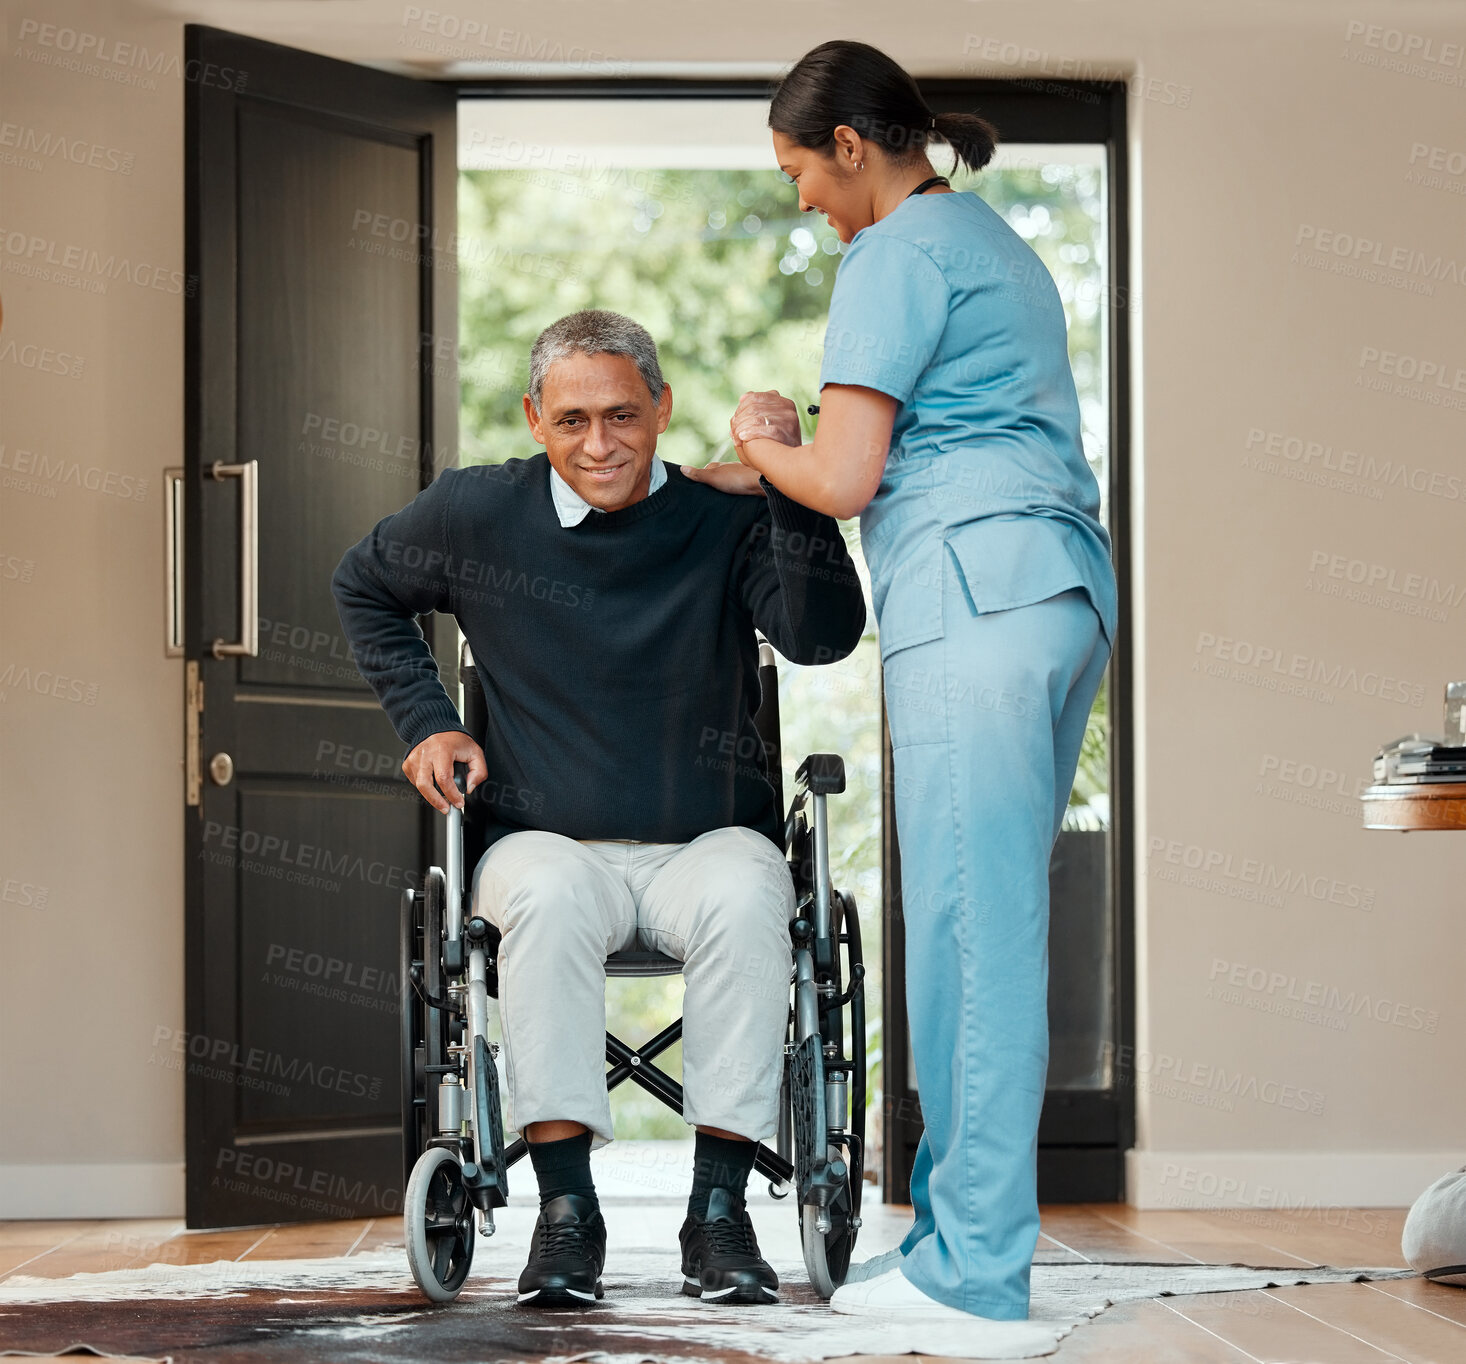 Buy stock photo Shot of a young nurse caring for an older man in a wheelchair